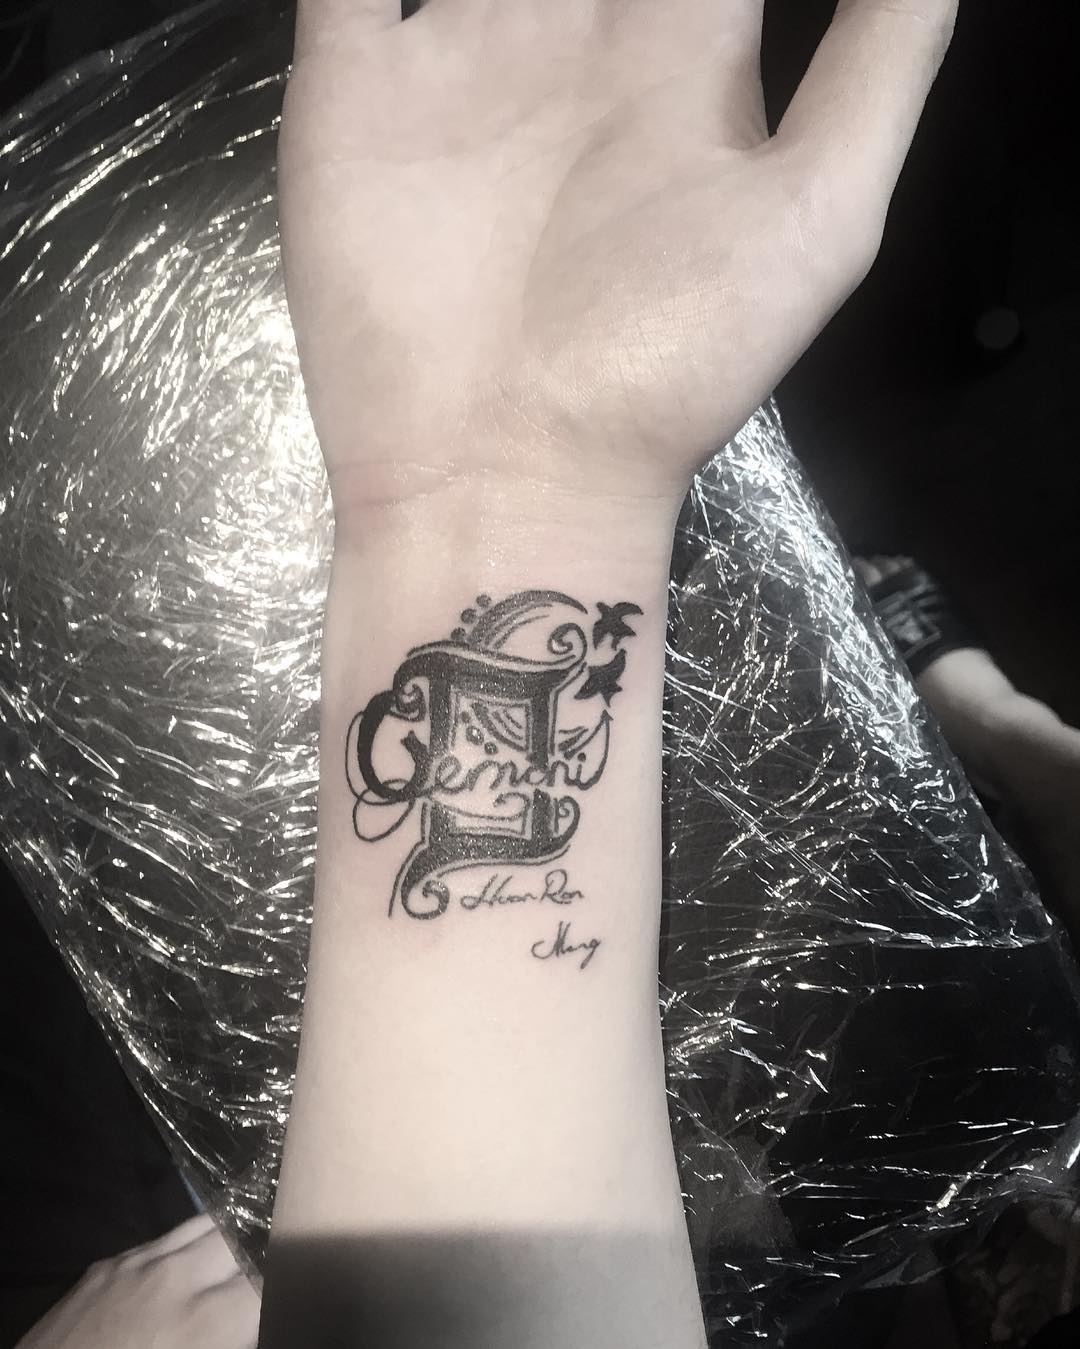 50 Zodiac Tattoos That Are Out of This World | CafeMom.com